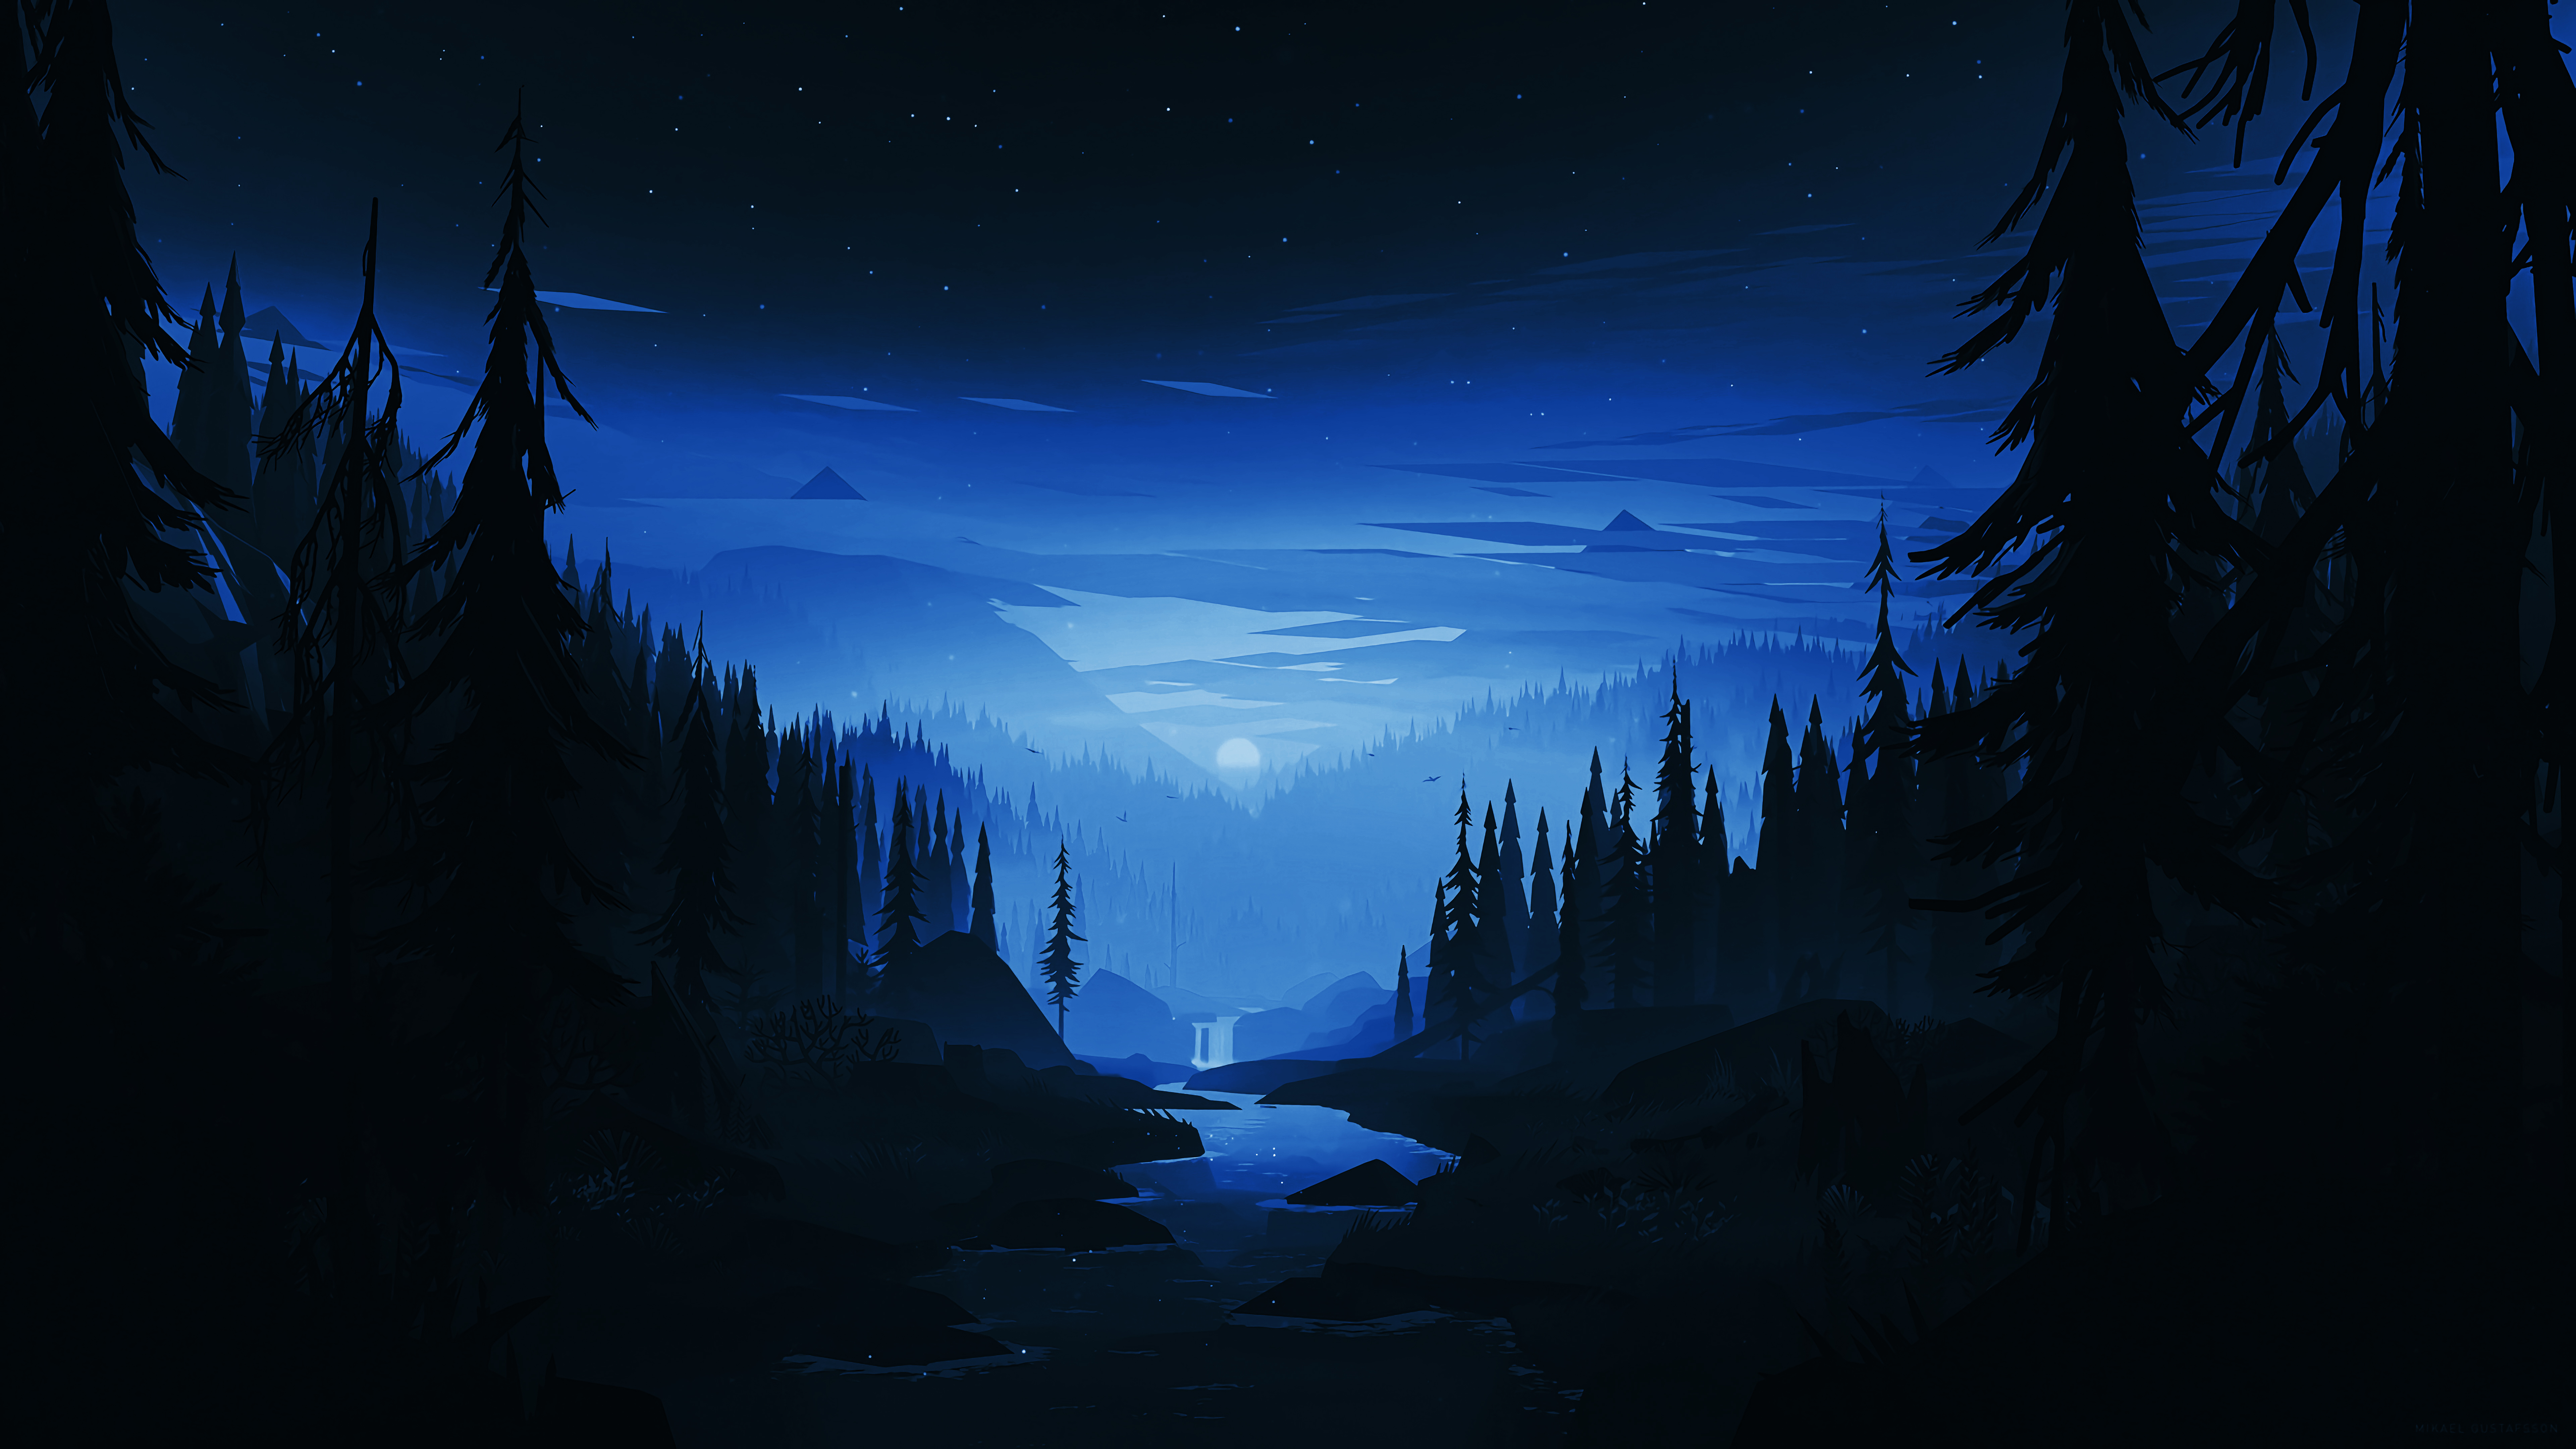 Wallpaper, artwork, Moon, calm, forest, river, mountains, night sky, stars, clouds 7680x4320